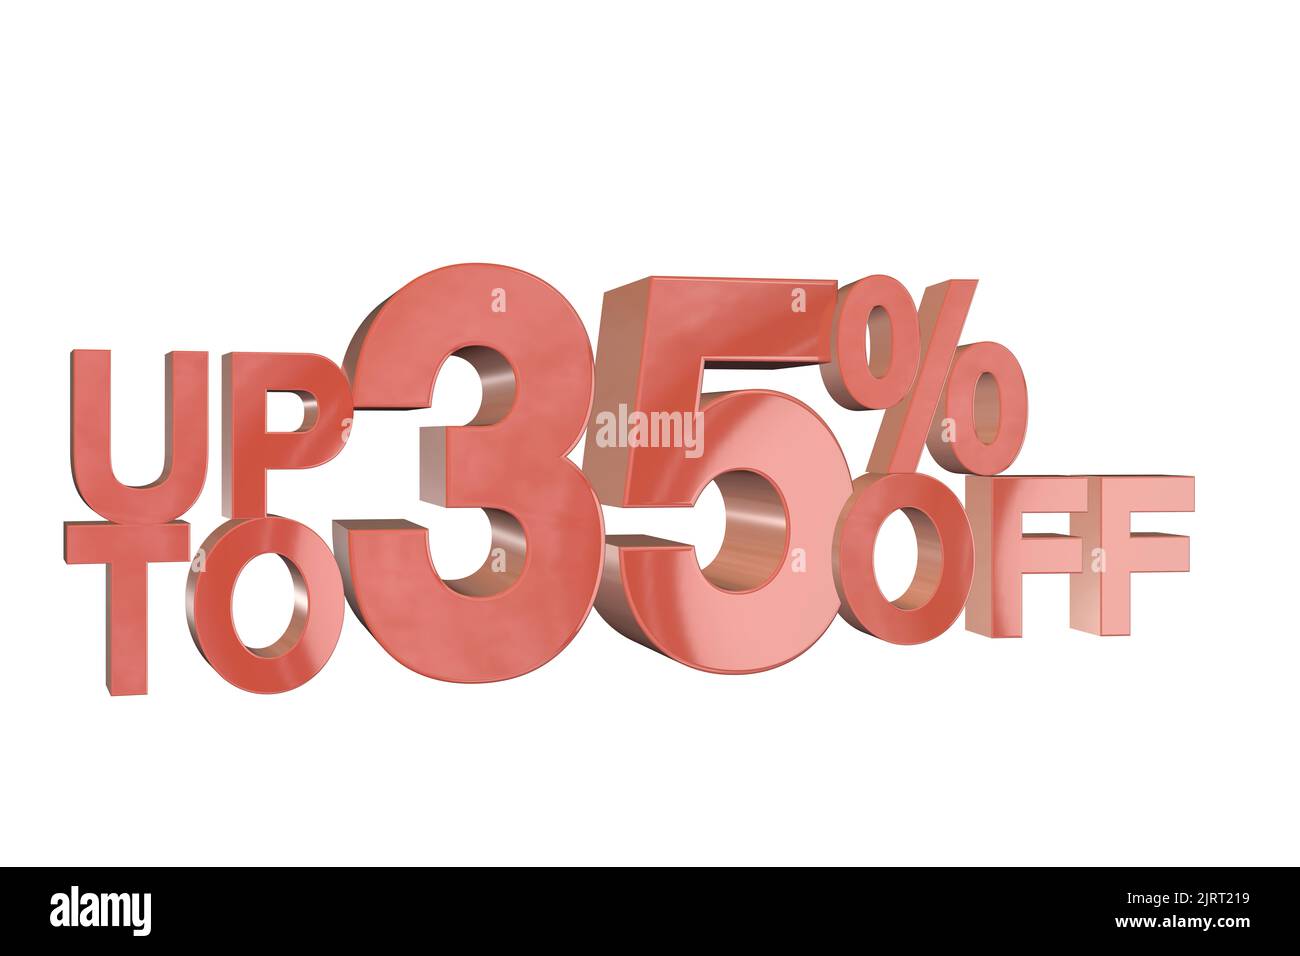 35% off banner, 35% off sale sign 3D rendered discount banner marketing sign showing minus - up to upto 35% percent off Stock Photo